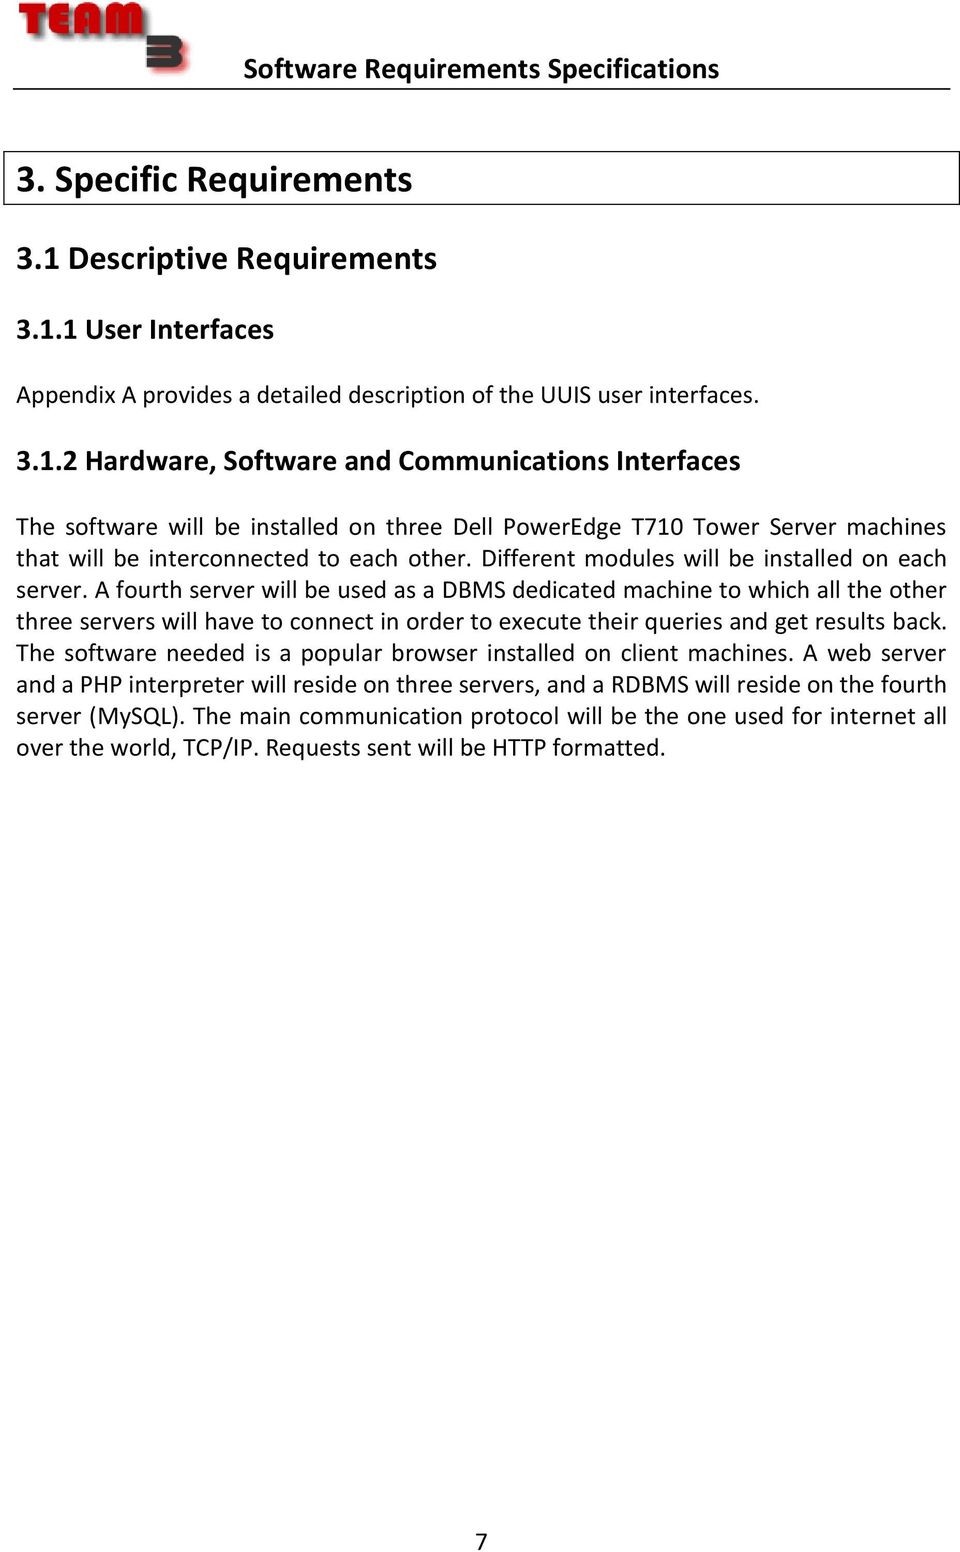 1 User Interfaces Appendix A provides a detailed description of the UUIS user interfaces. 3.1.2 Hardware, Software and Communications Interfaces The software will be installed on three Dell PowerEdge T710 Tower Server machines that will be interconnected to each other.